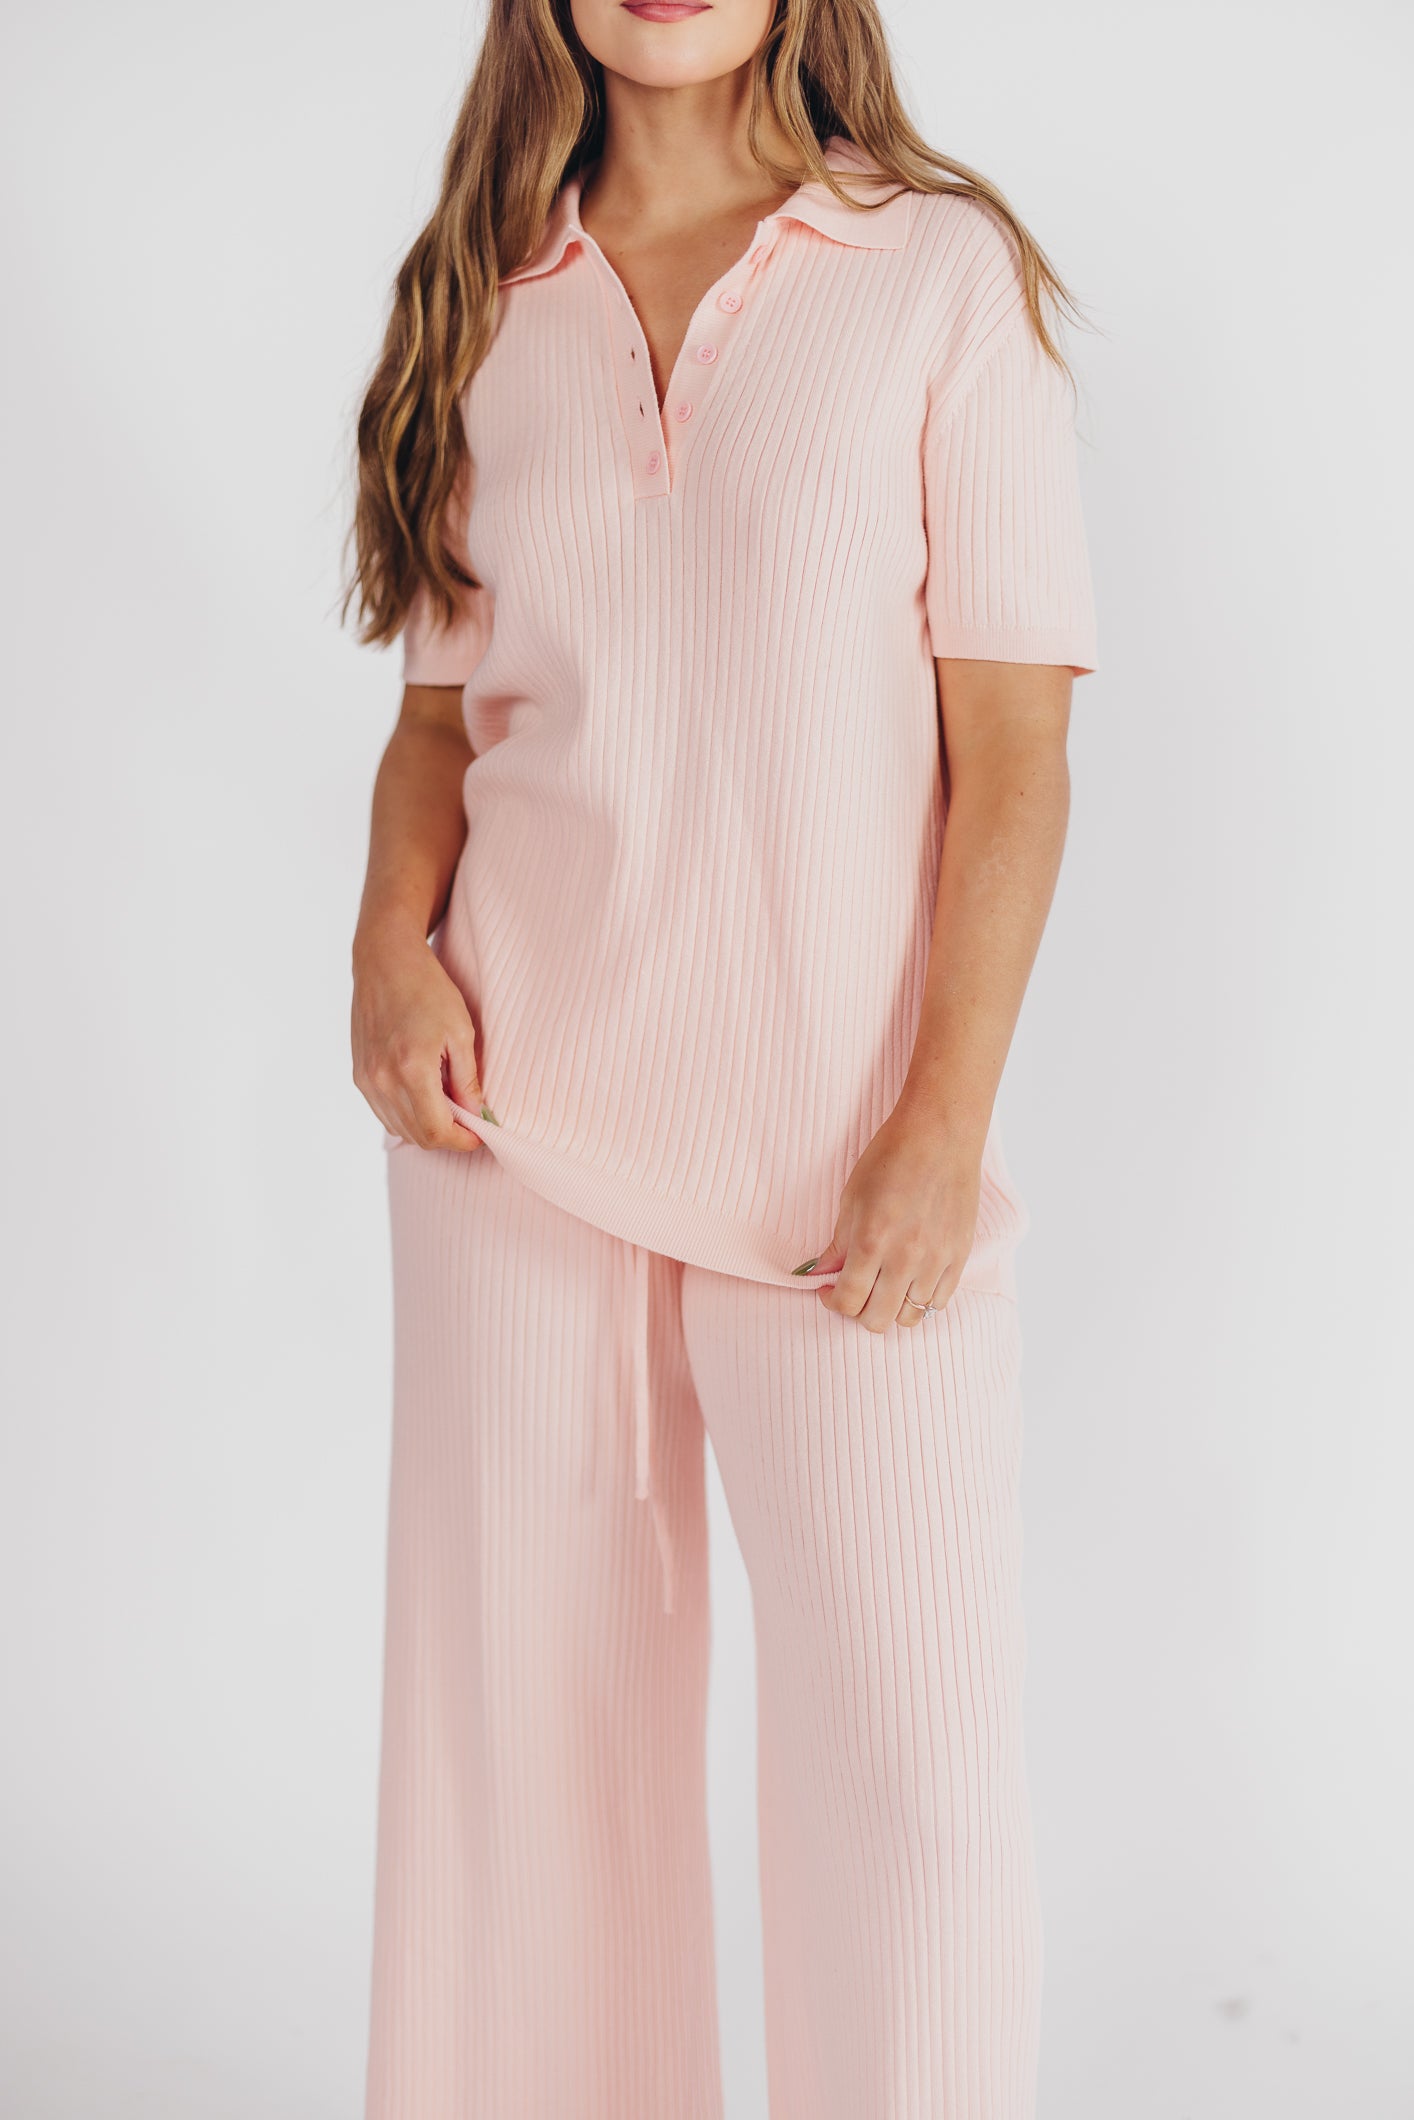 Petra Collared Top in Soft Pink